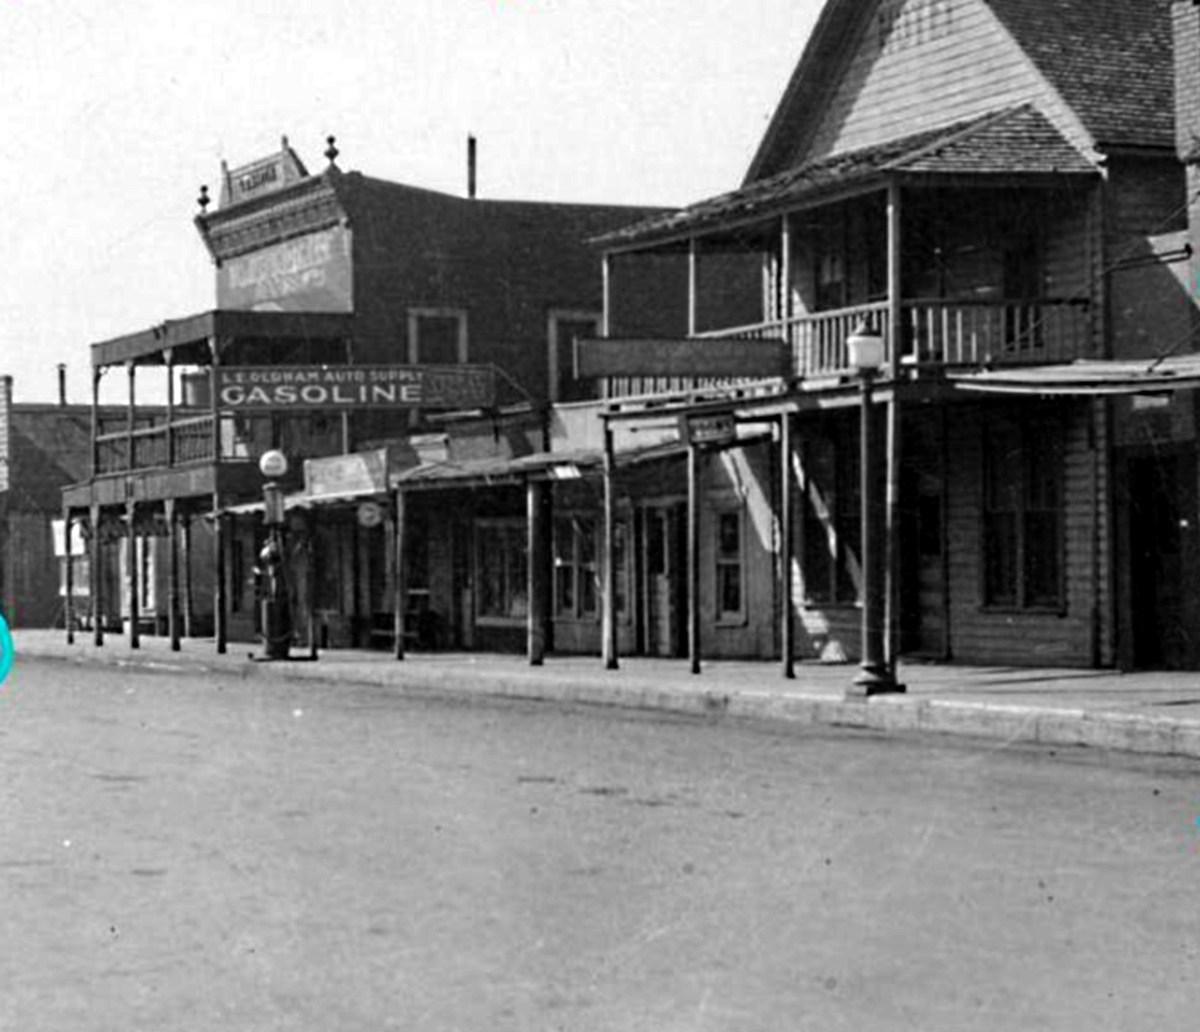 Commerce Street in Childress in 1920